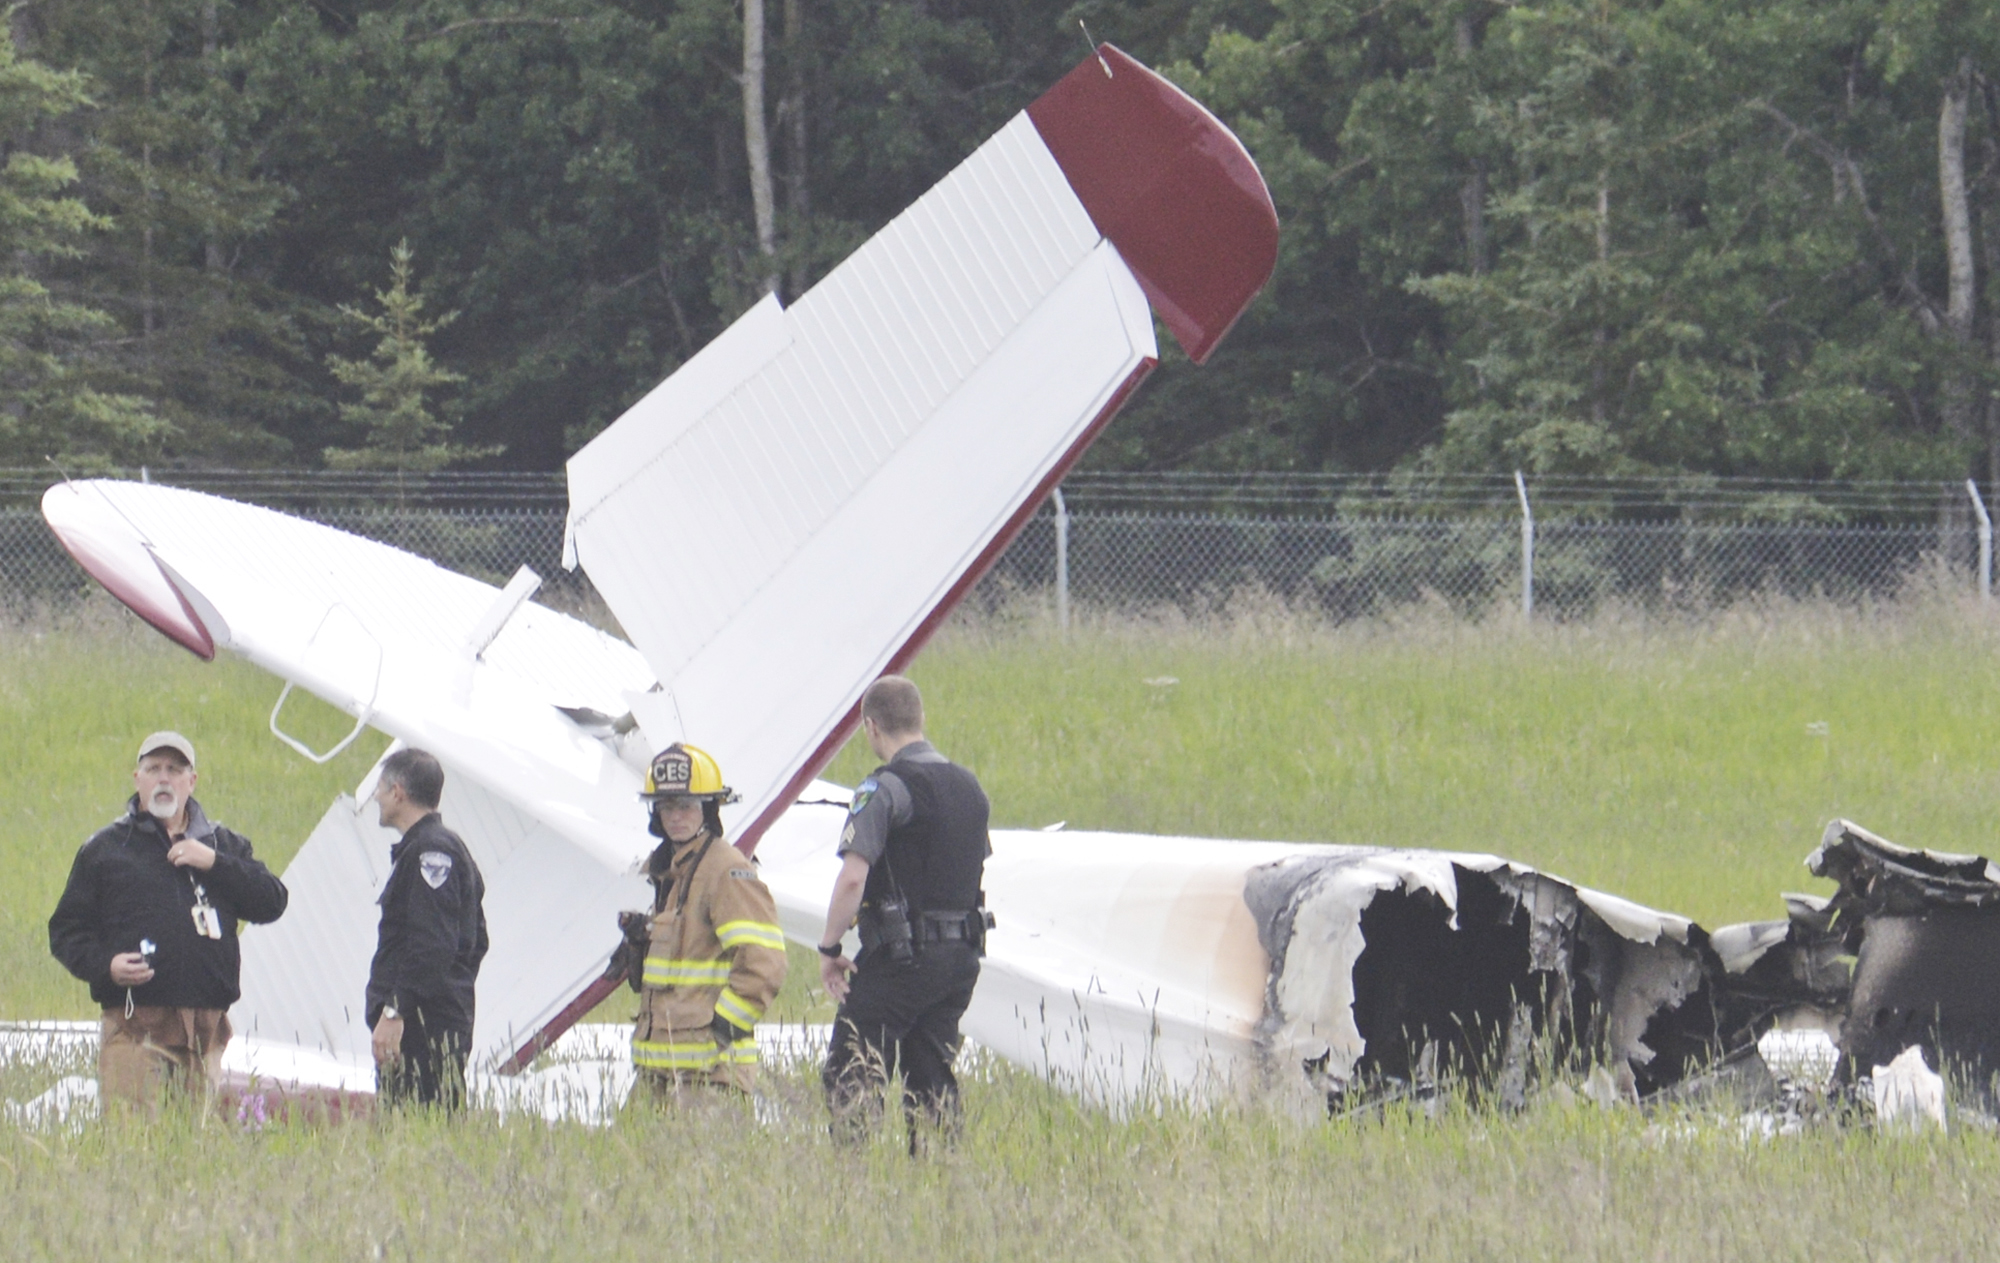 In this July 7, 2013 file photo investigators look at the remains of a fixed-wing aircraft that was engulfed in flames  at the Soldotna Airport in Soldotna, Alaska. No survivors were located. Ten people died in the the crash.